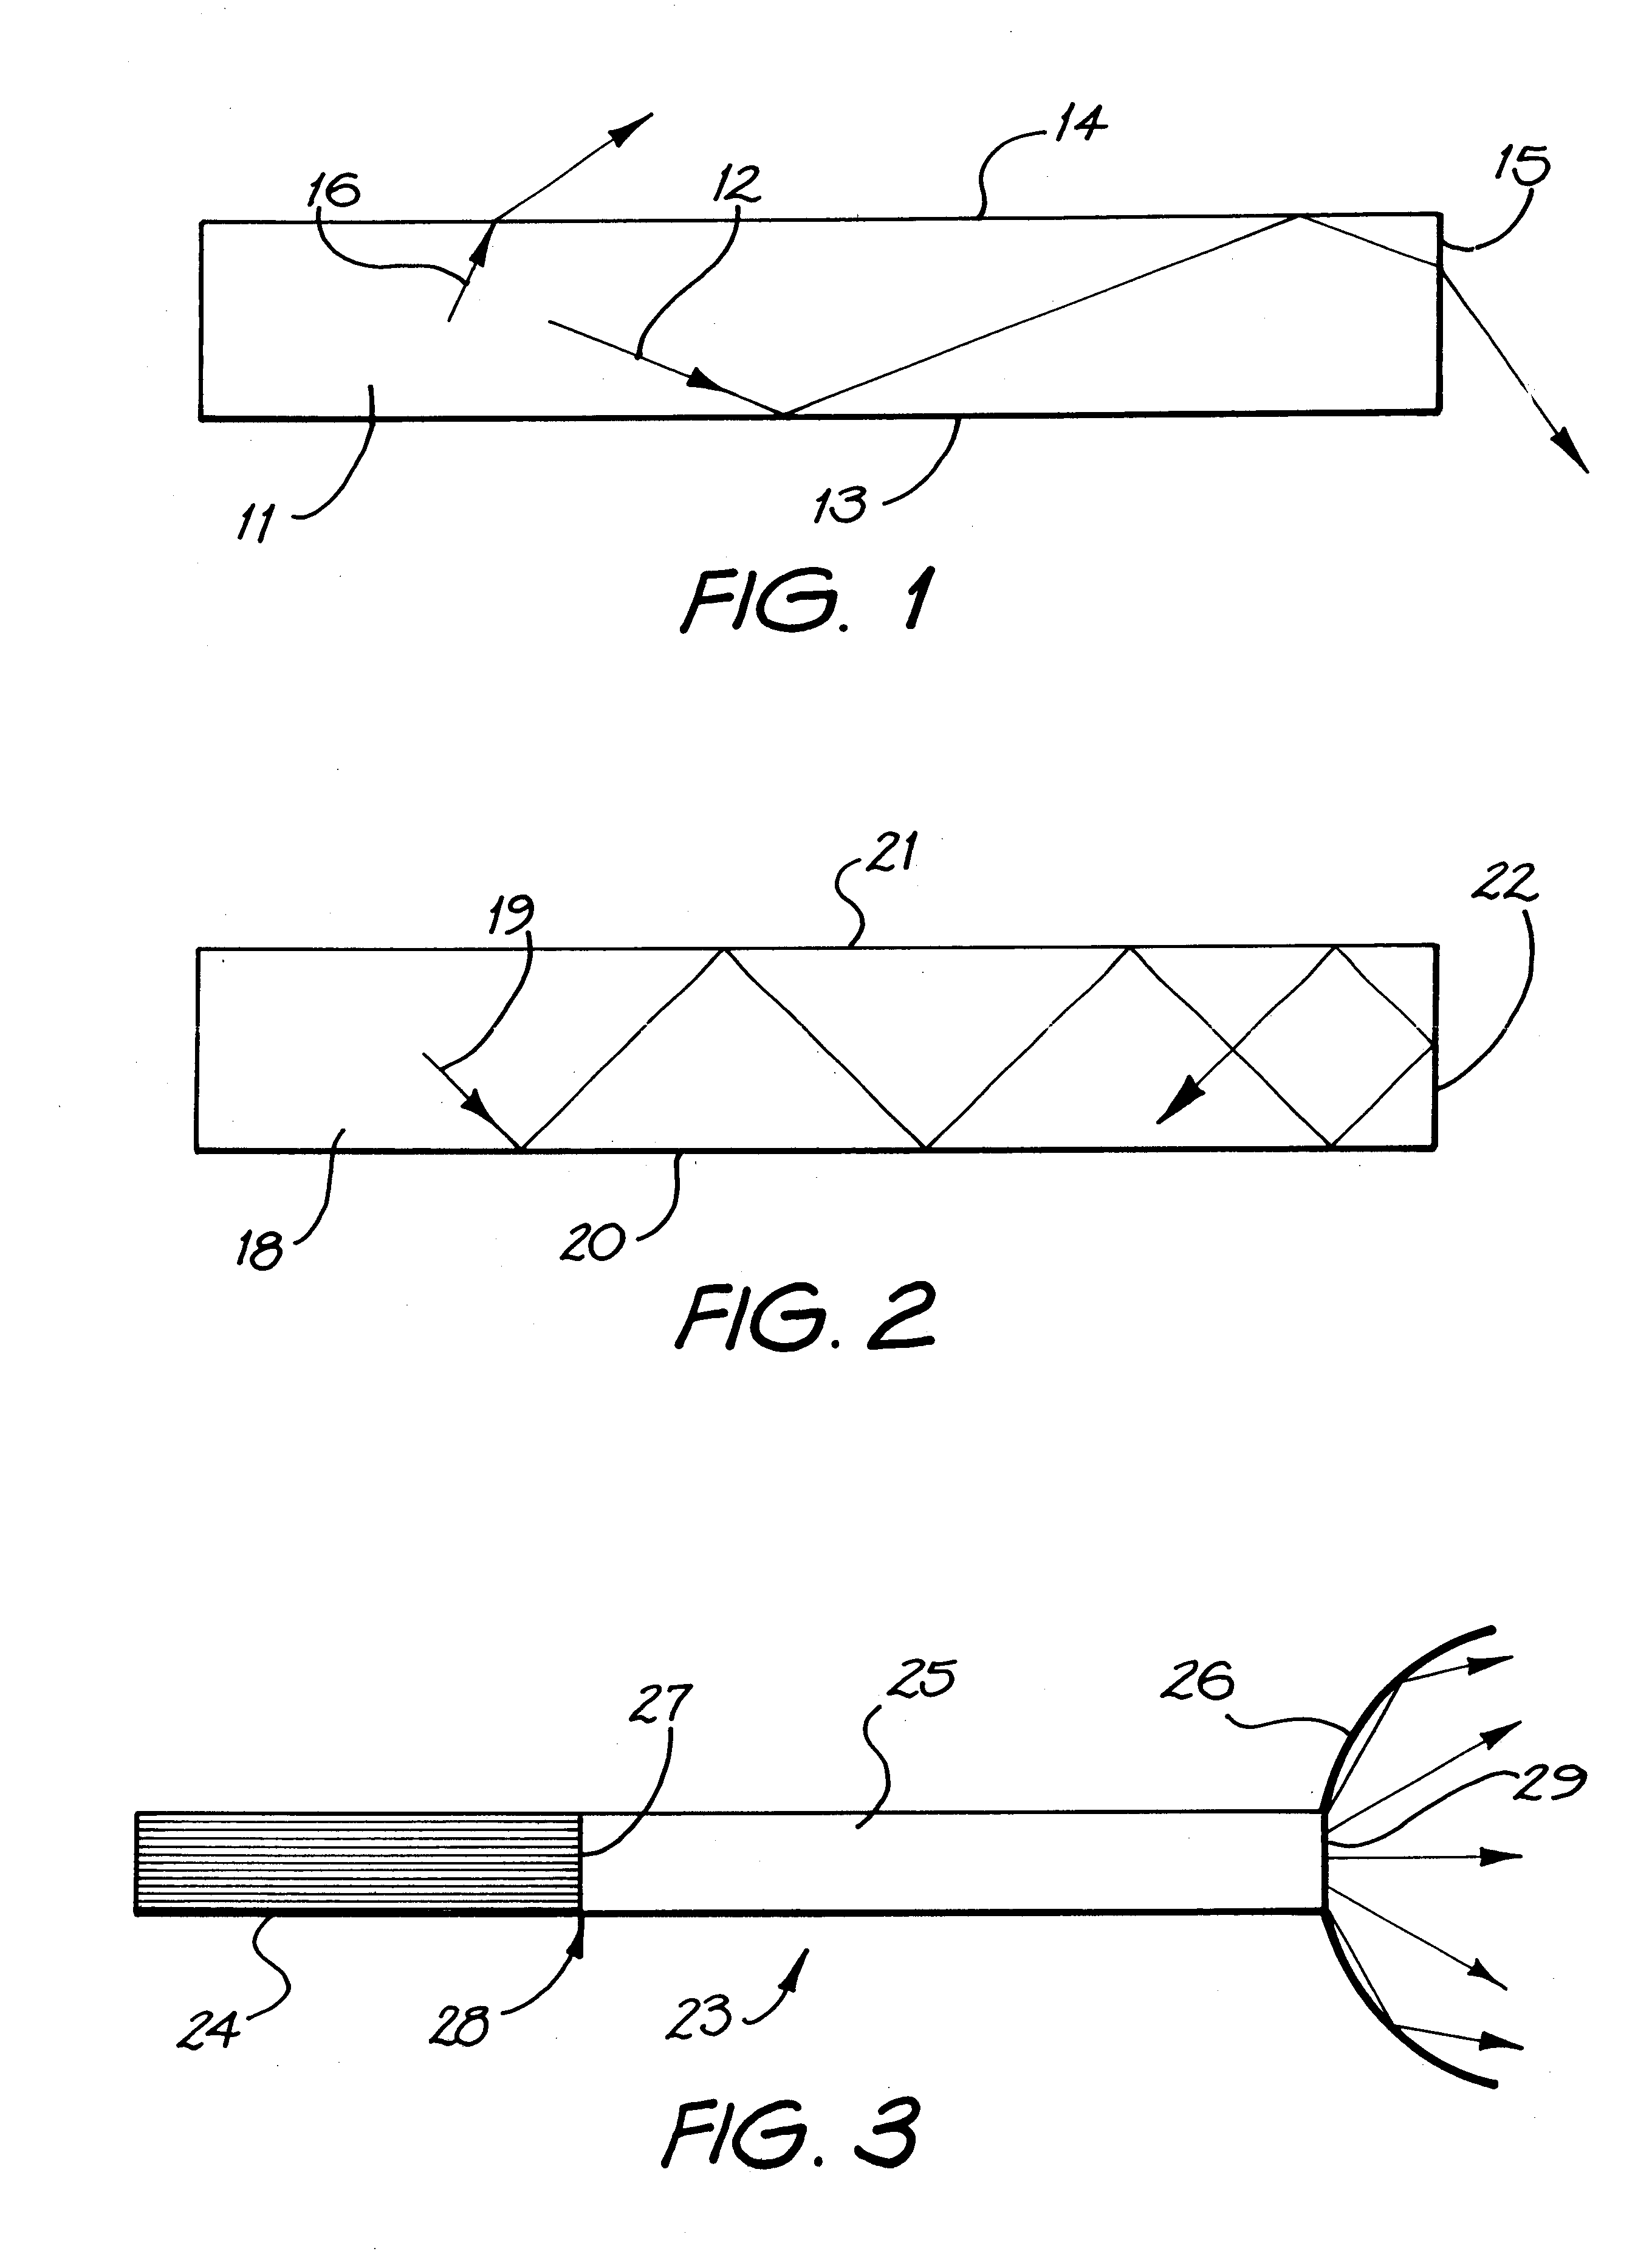 Lighting system for transmitting and releasing luminescent radiation